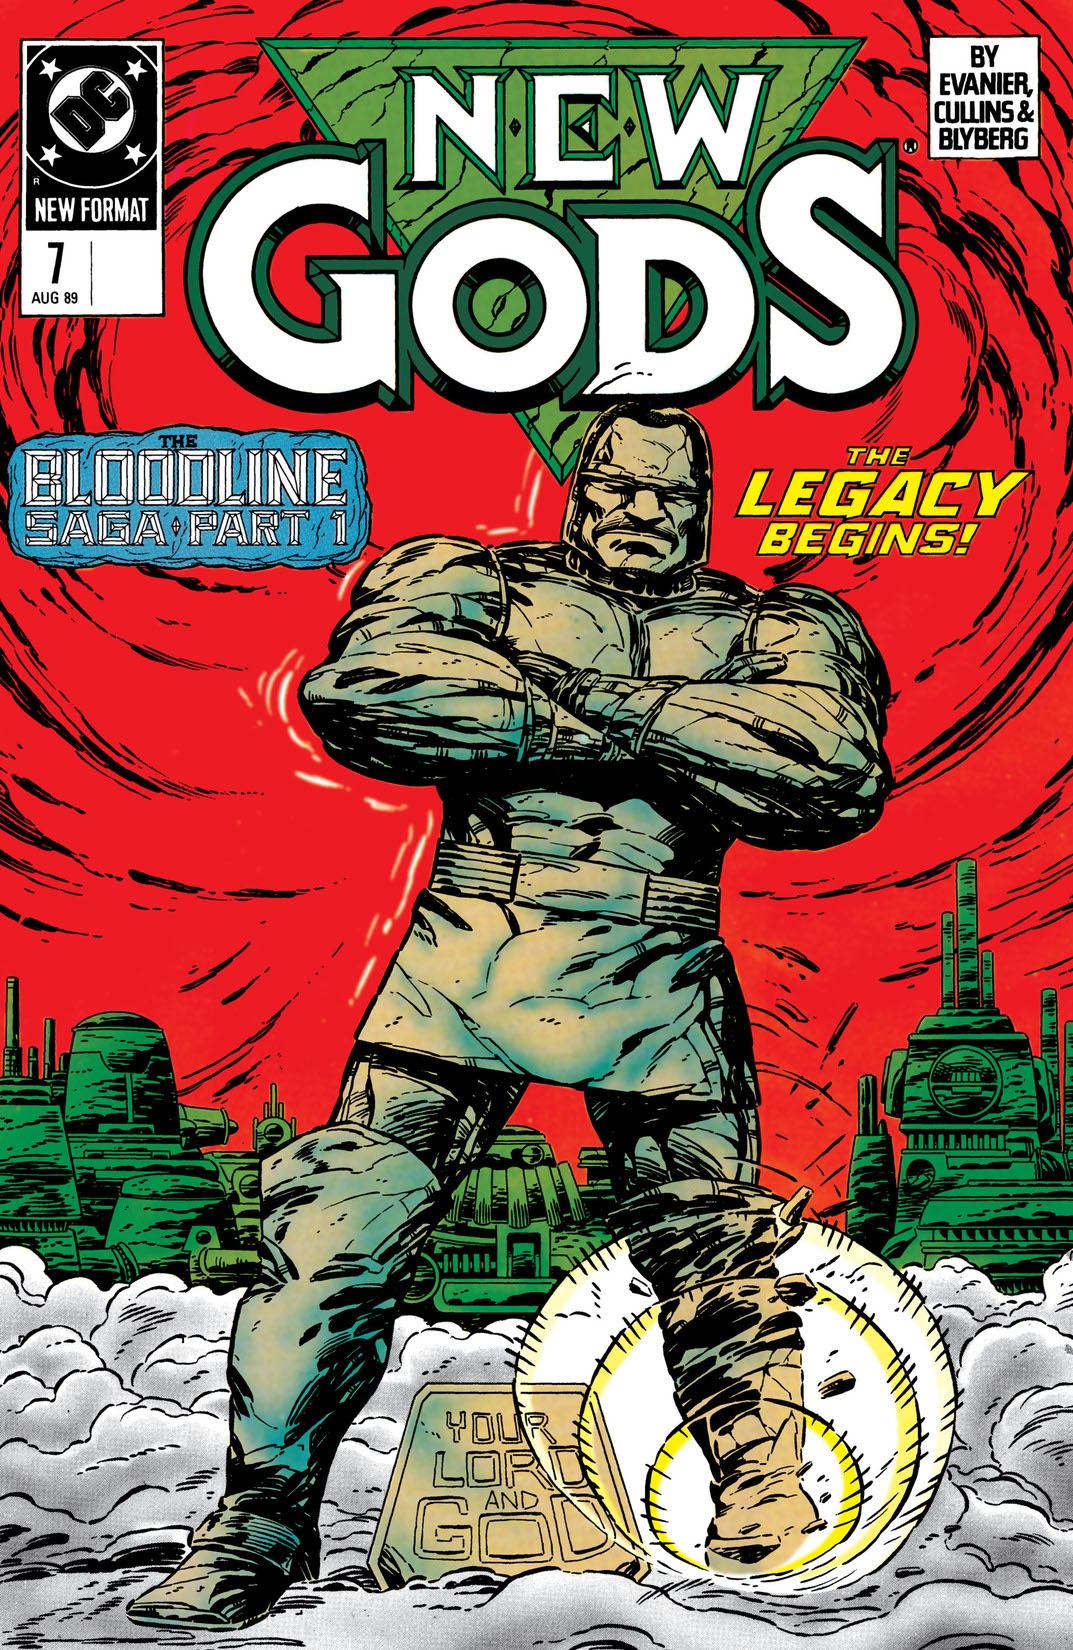 New Gods (1989-) #7 preview images